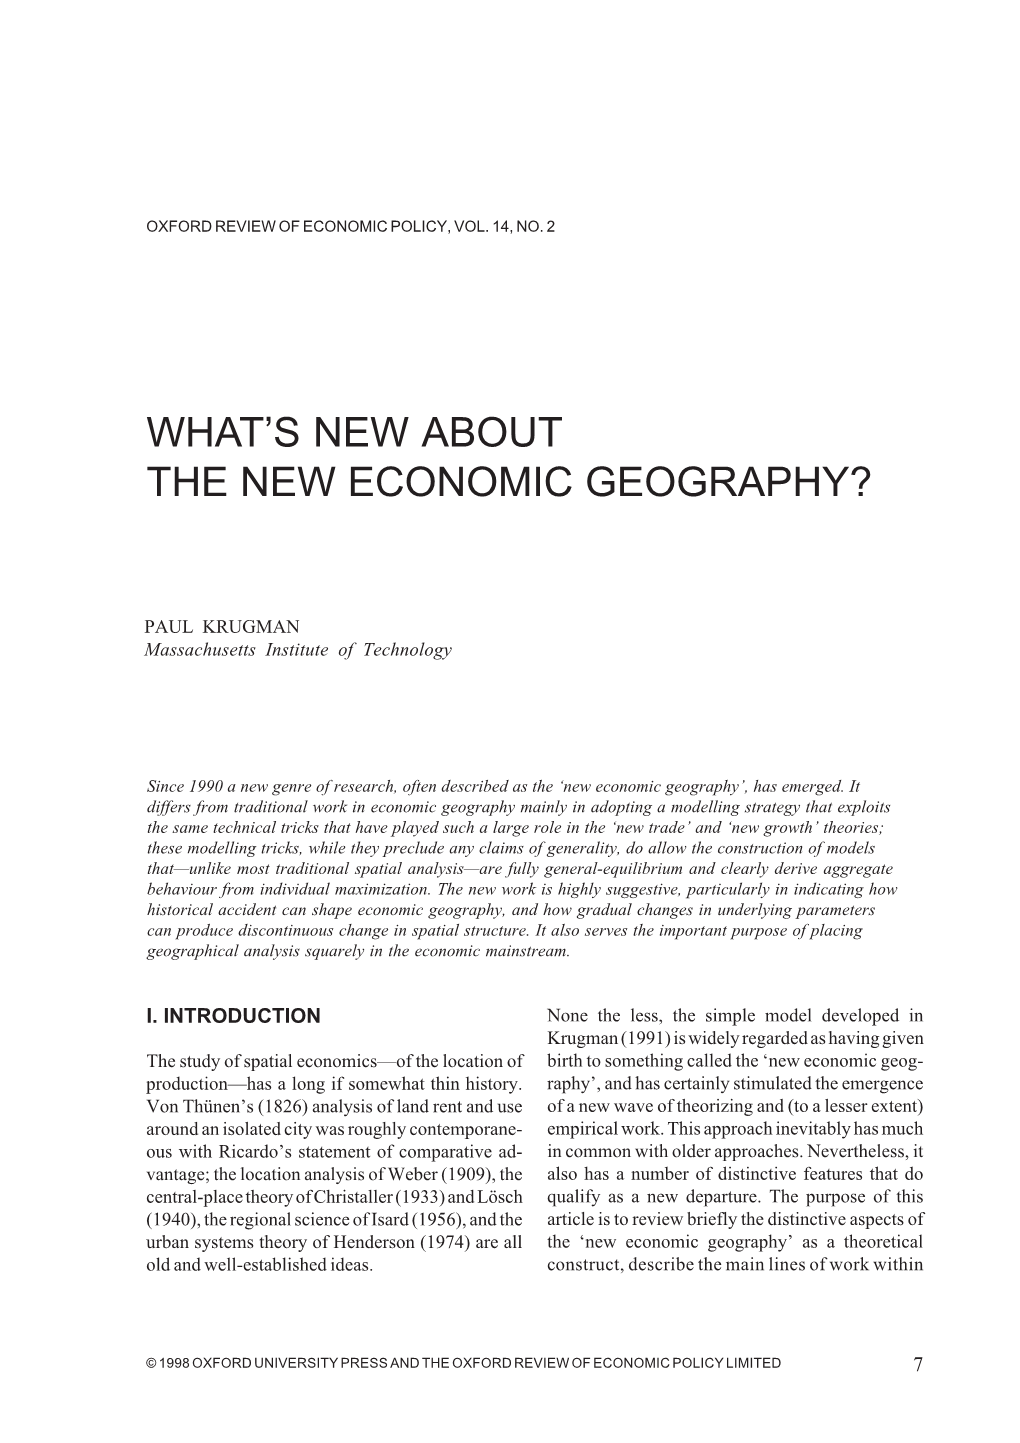 What's New About the New Economic Geography?